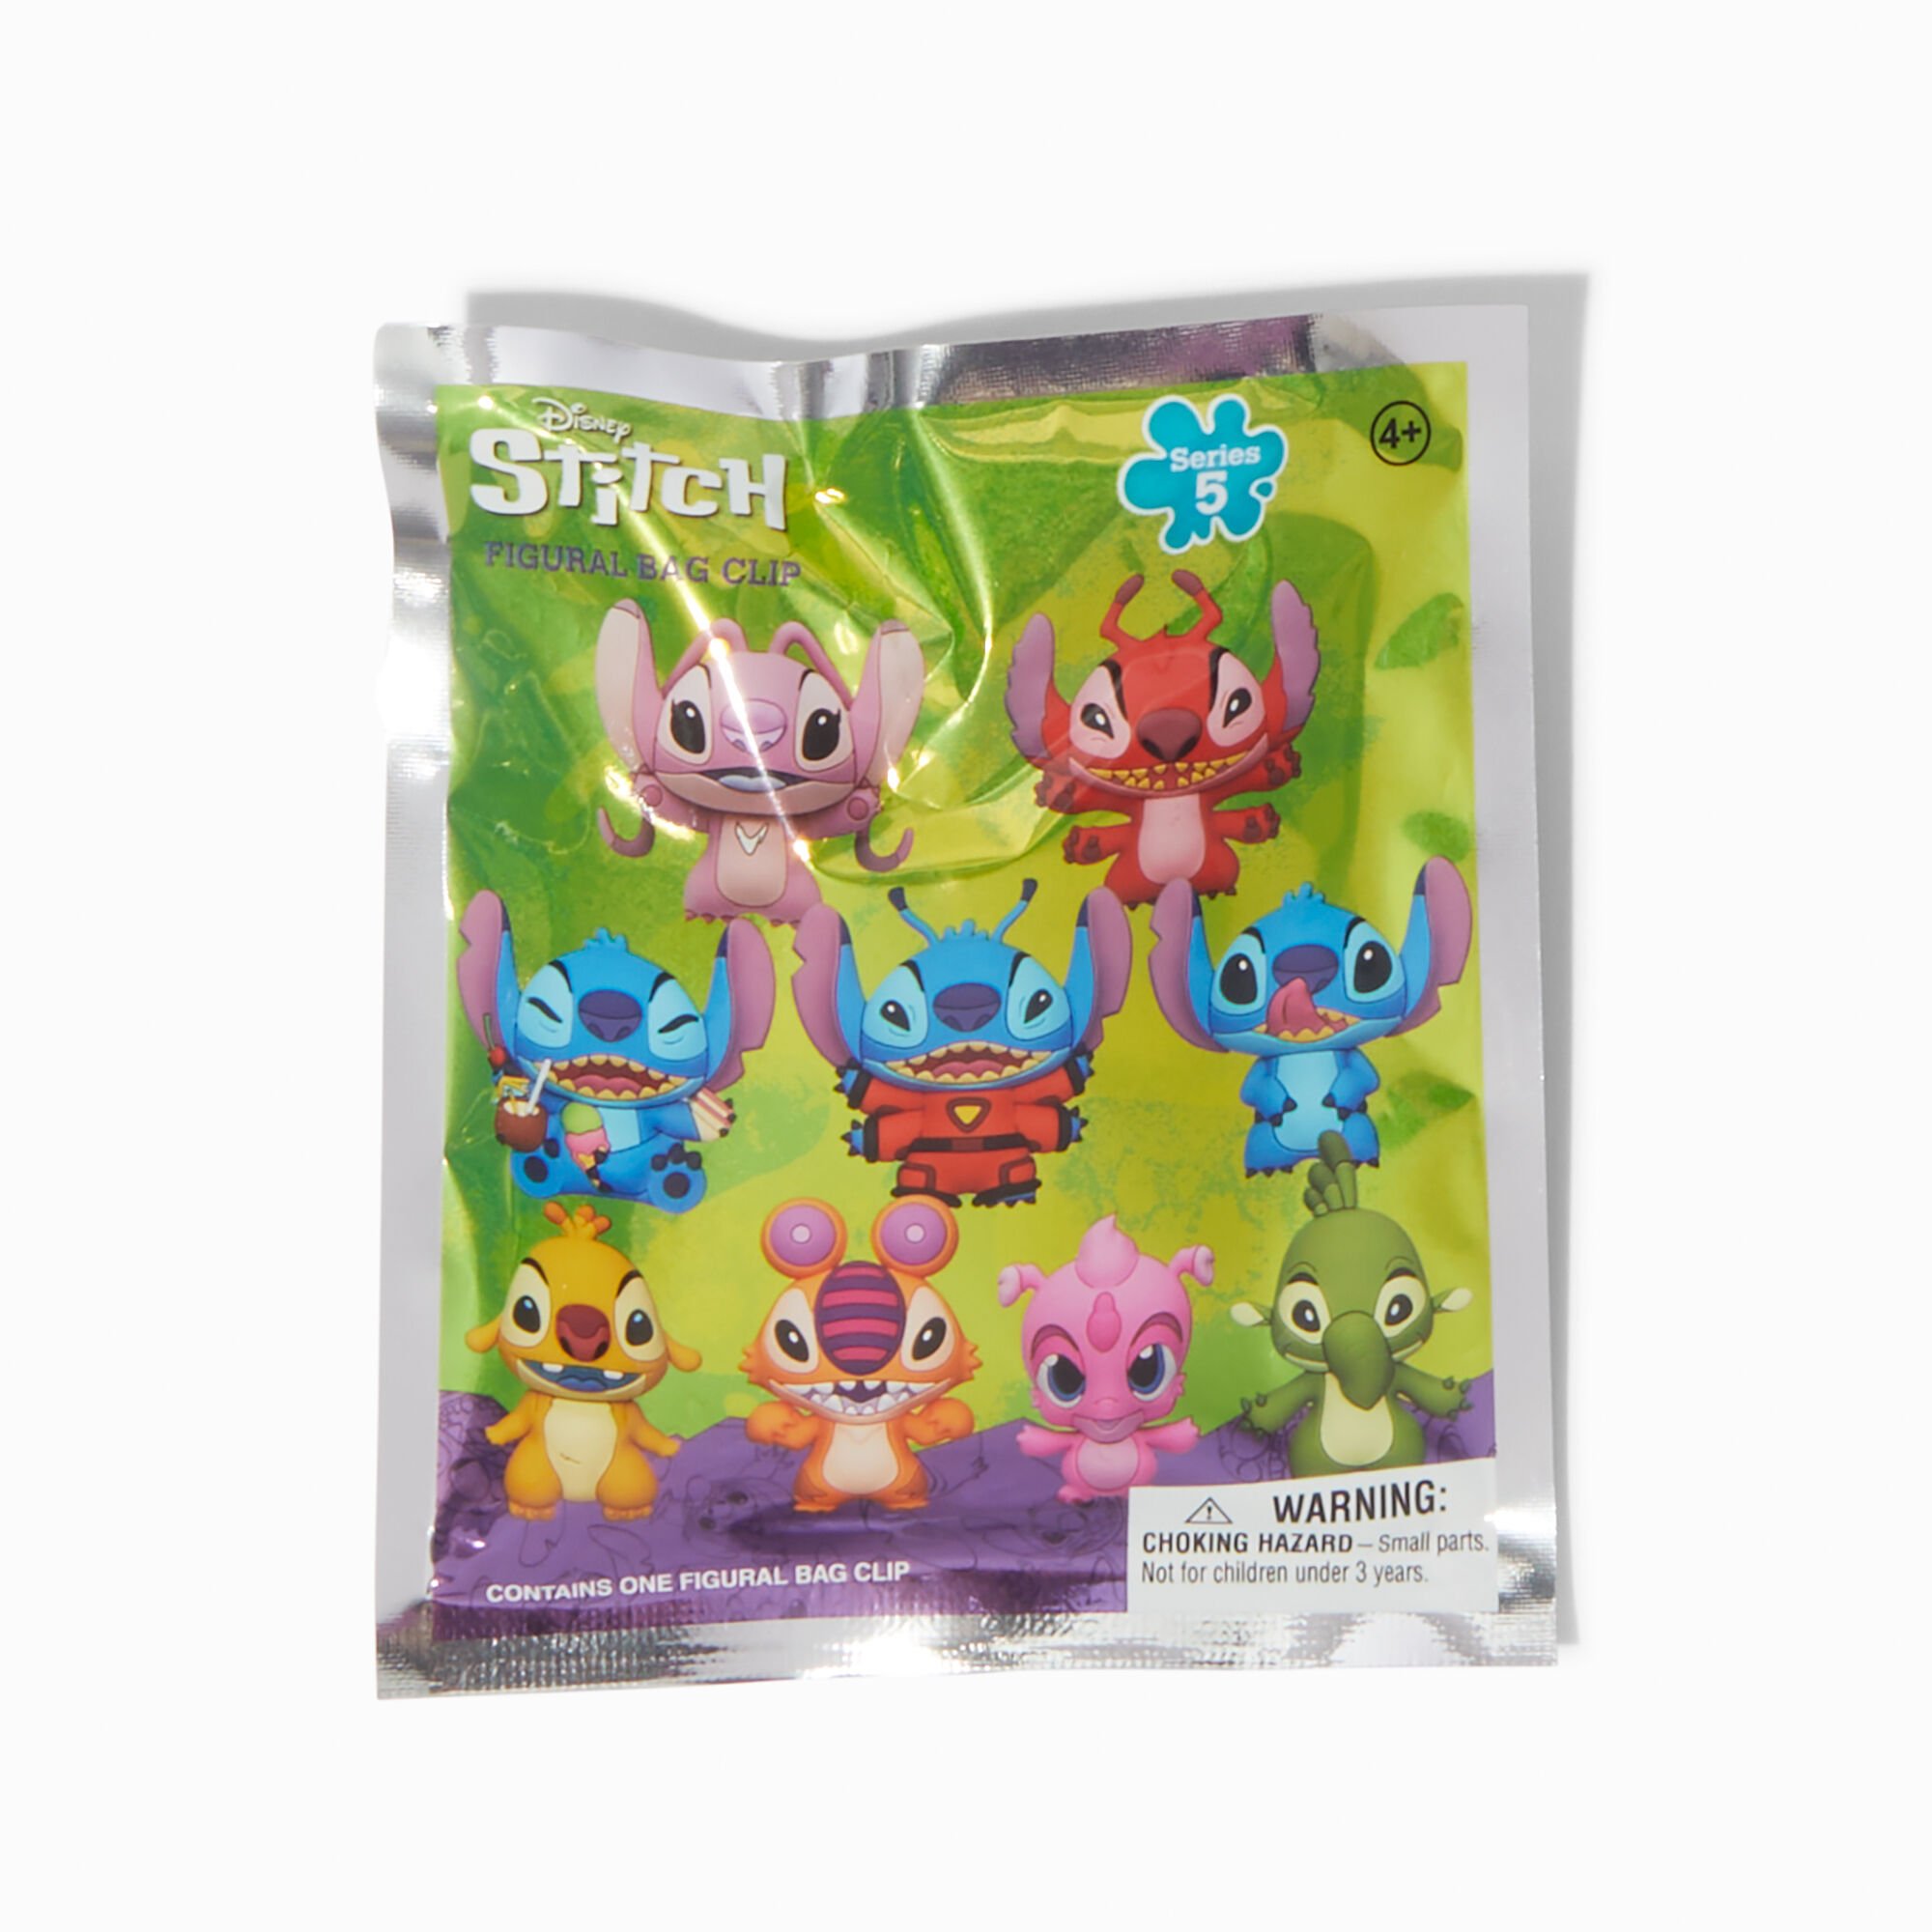 claire's disney stitch figural bag clip blind bag - styles may vary